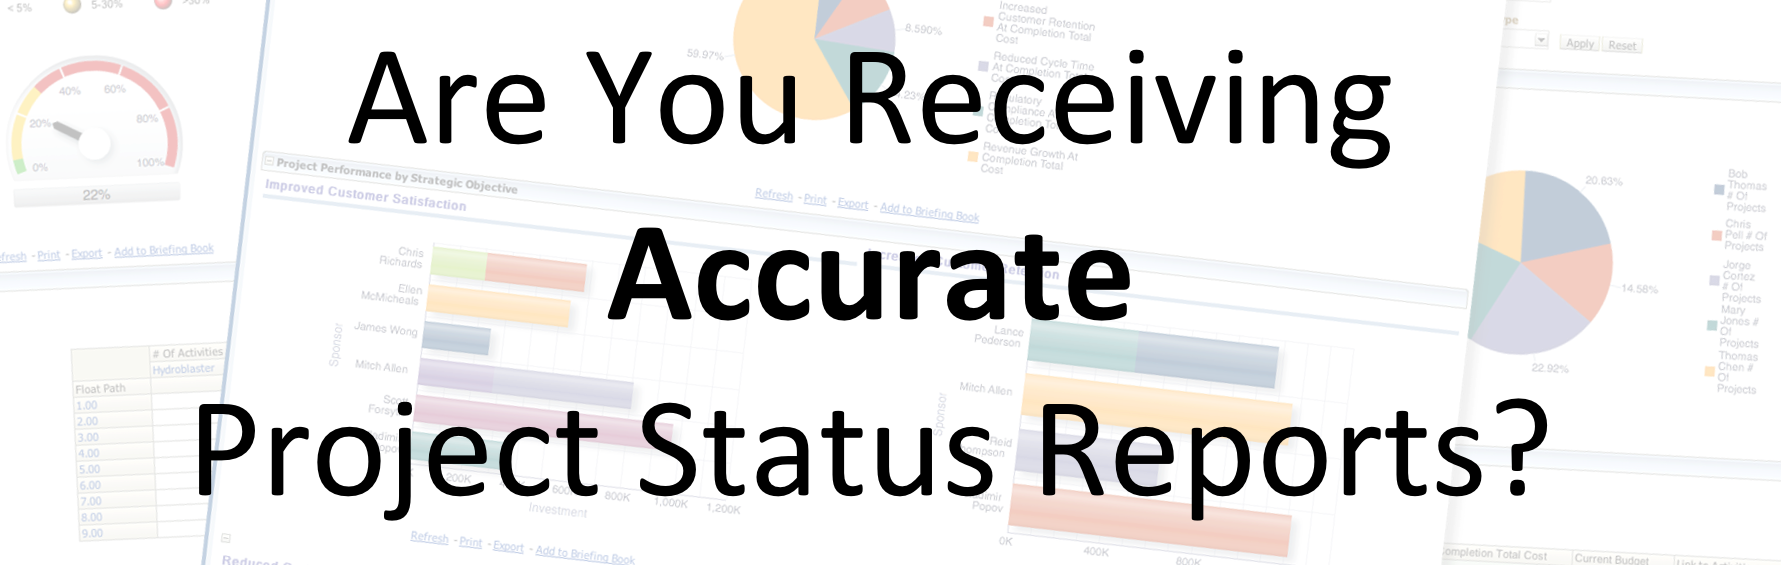 Are You Receiving Accurate Project Status Reports?